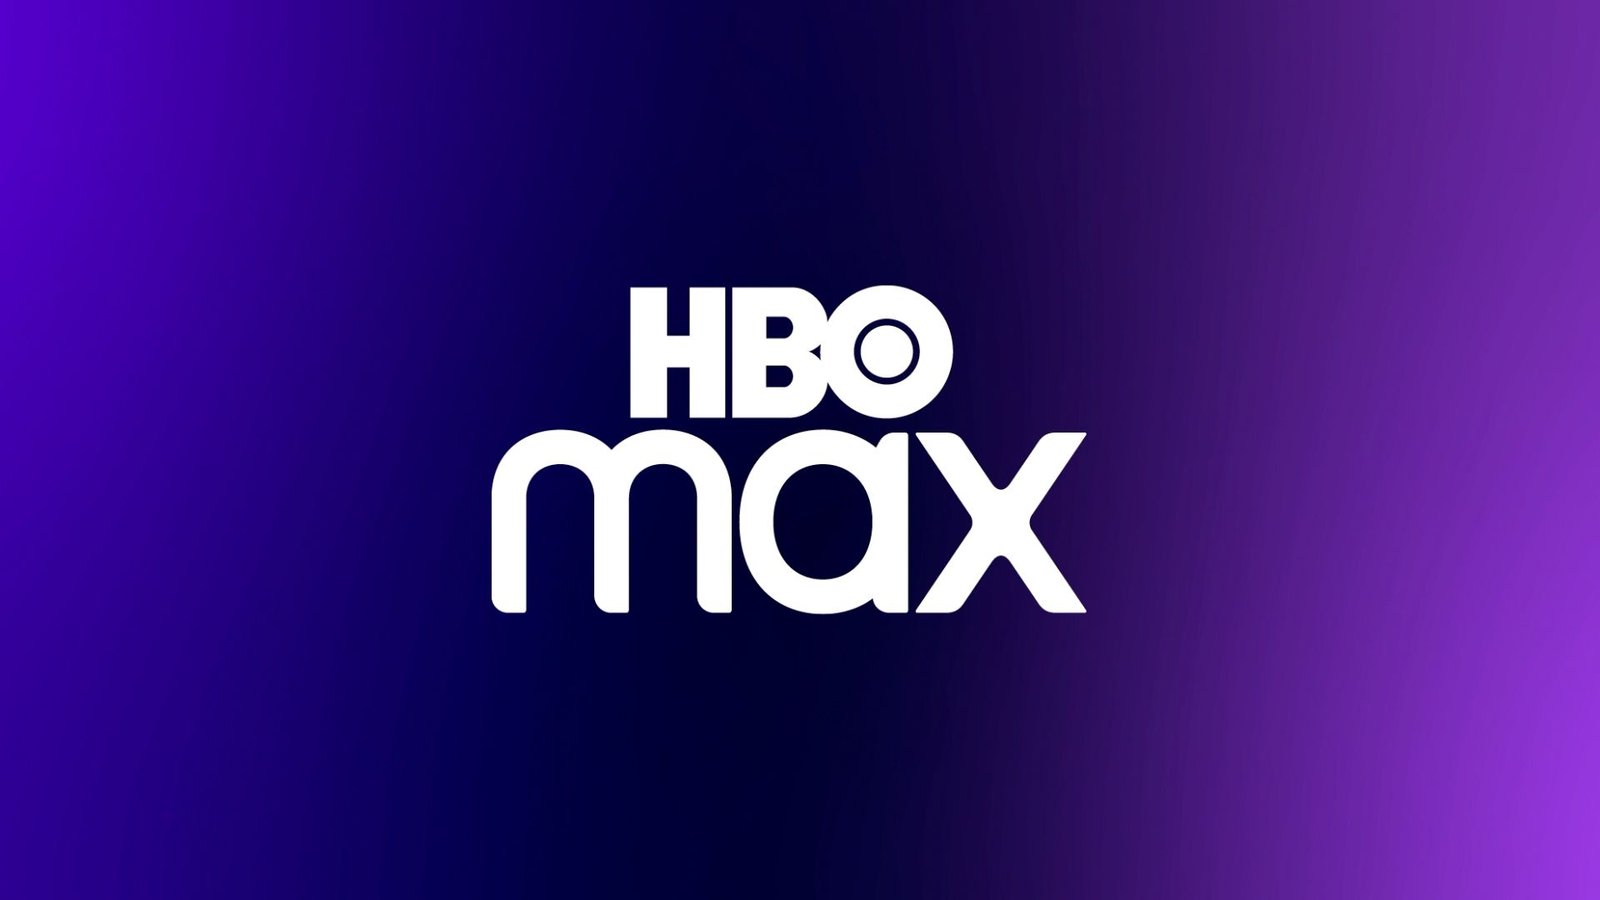 5 best romantic movies to watch on HBO Max